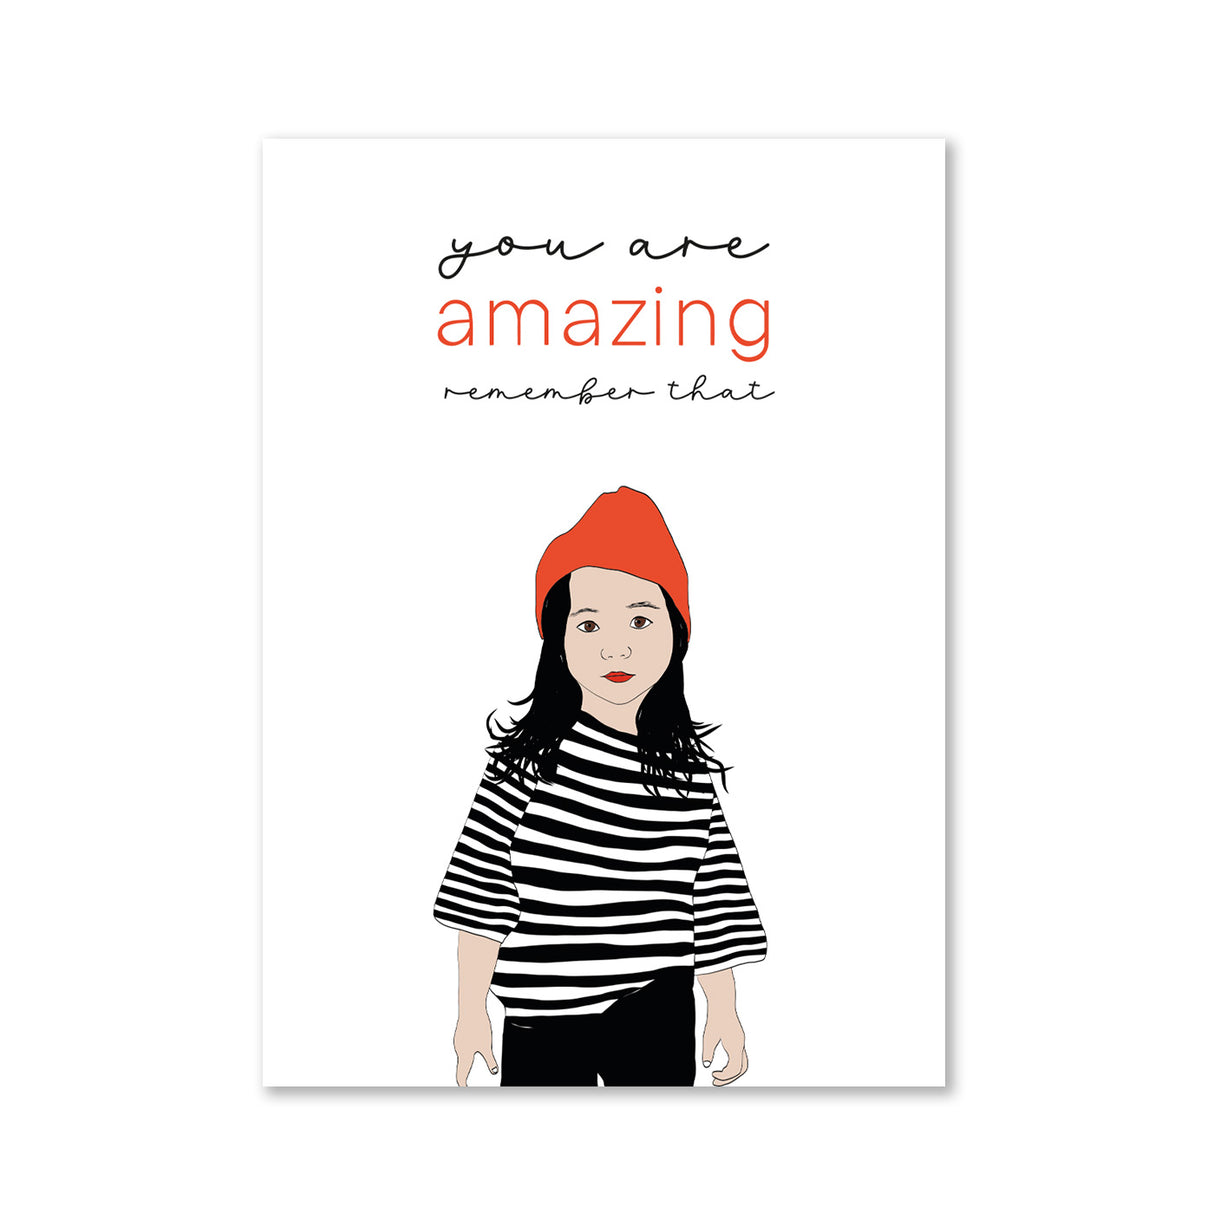 You are amazing - Magnet